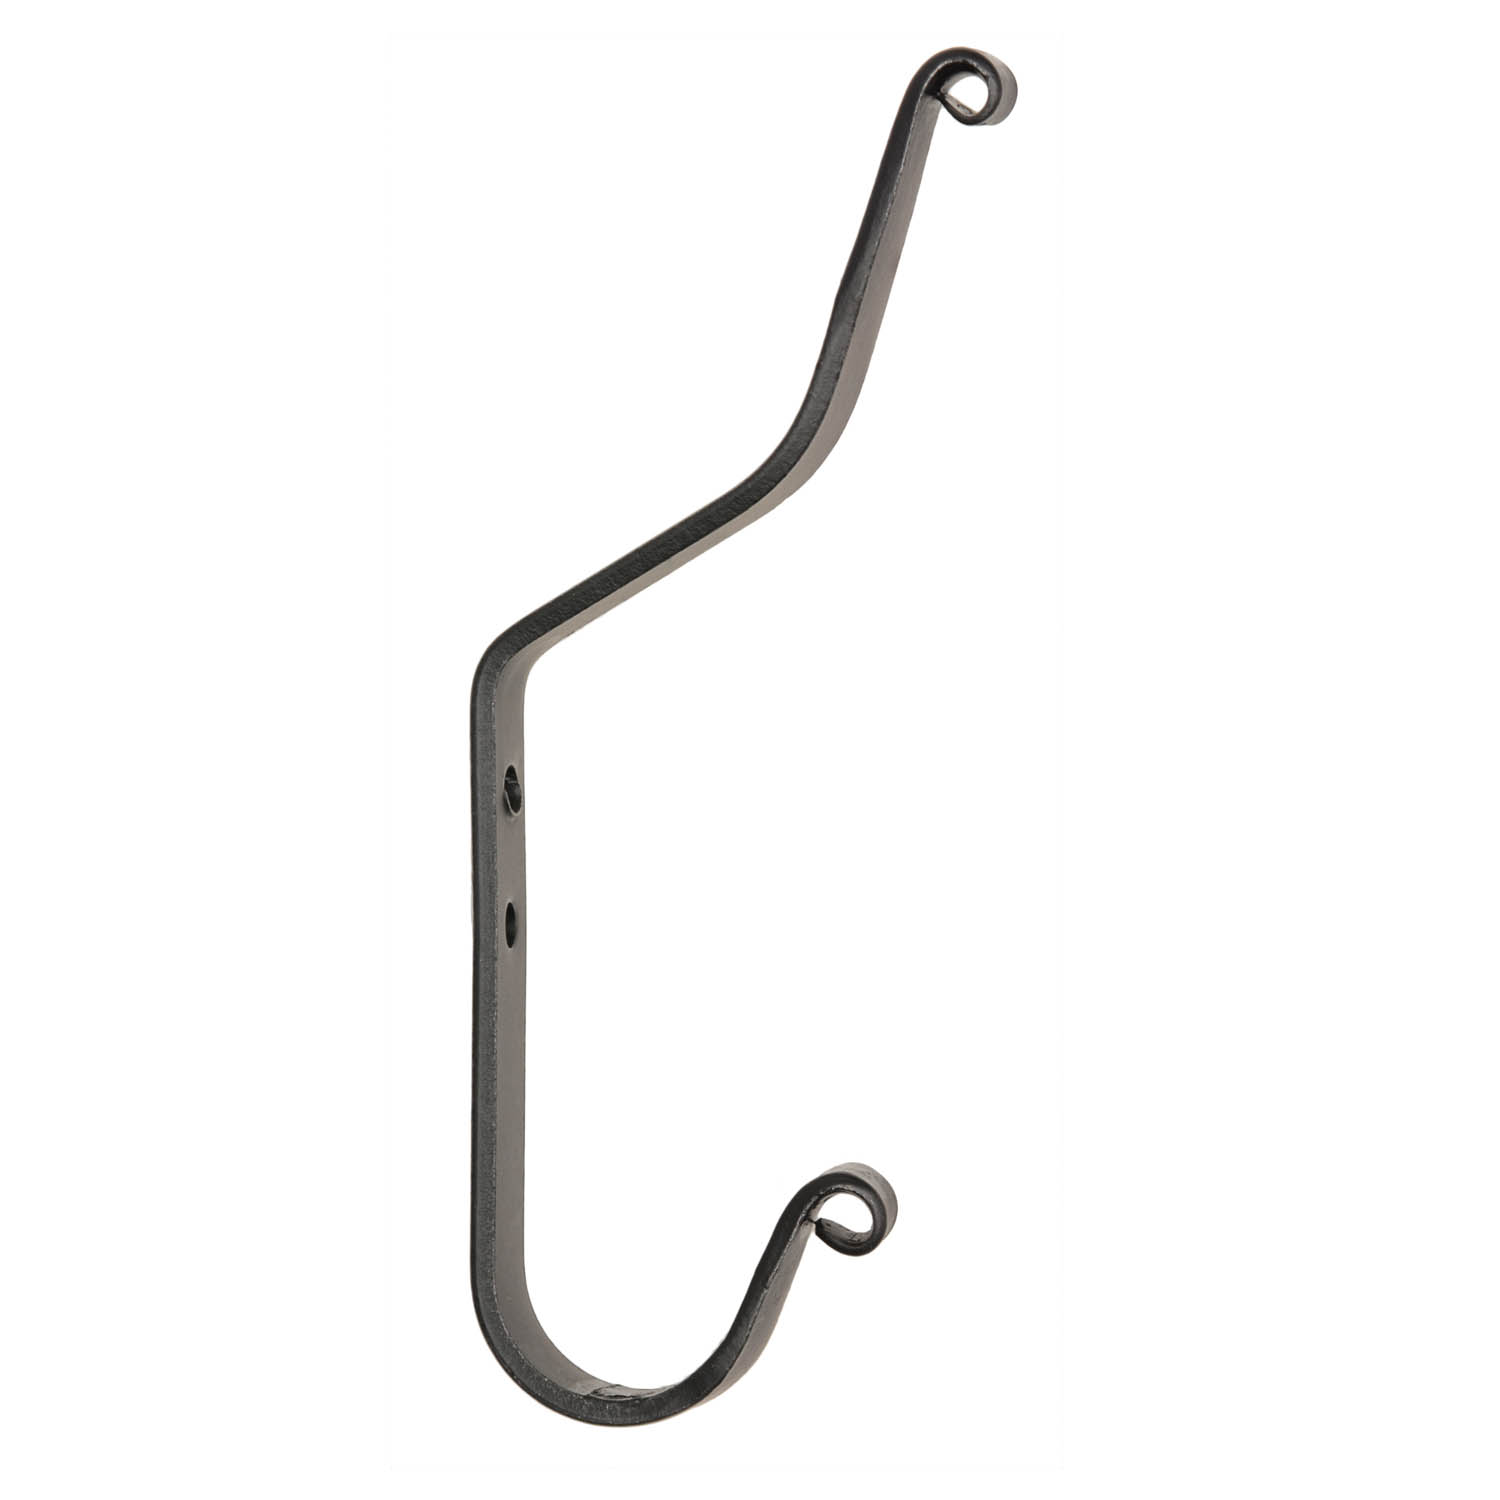 Irvin's Tinware - Wrought Iron Coat Hooks (Set of 6) ACCS WRGT R302Q6